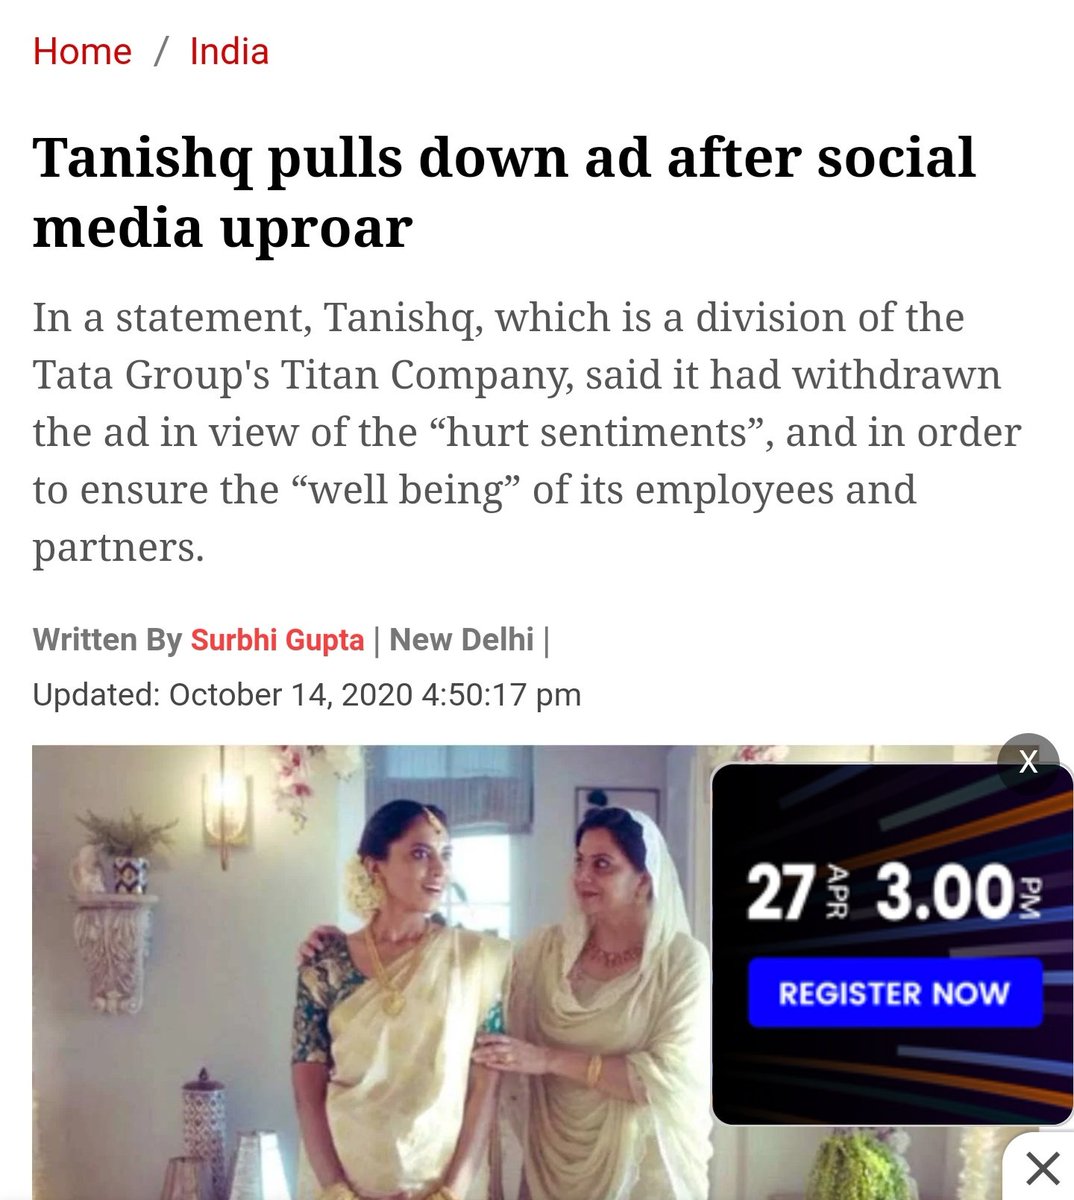 Compeling the movie distributors, ad agencies and producers think before choosing someone.A product owner will only look for brand ambassadors whose image is clean and not dubious.Public uproar against Tanishq gets them to pull down the add and issue a public apology.11/N